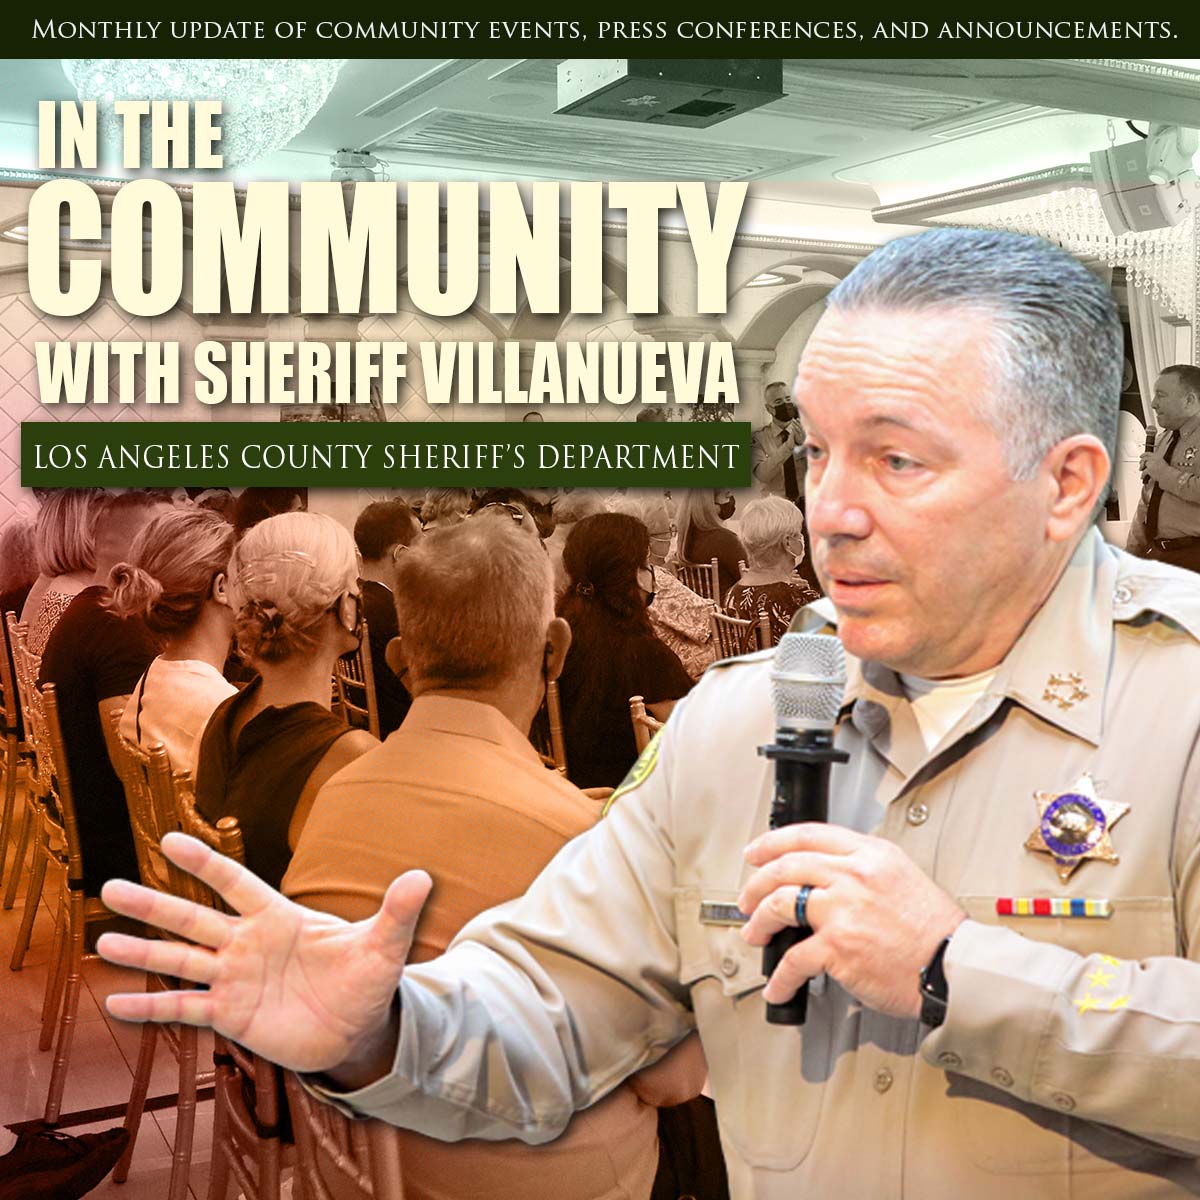 Good morning! This week’s newsletter is out. Featured topics include: Deputy Saves Inmate’s Life, Officials Offer a Safe Alternative for Street Racers, Combating Fentanyl Crisis, and attending the Annual Korean Parade. content.govdelivery.com/accounts/CALAC…